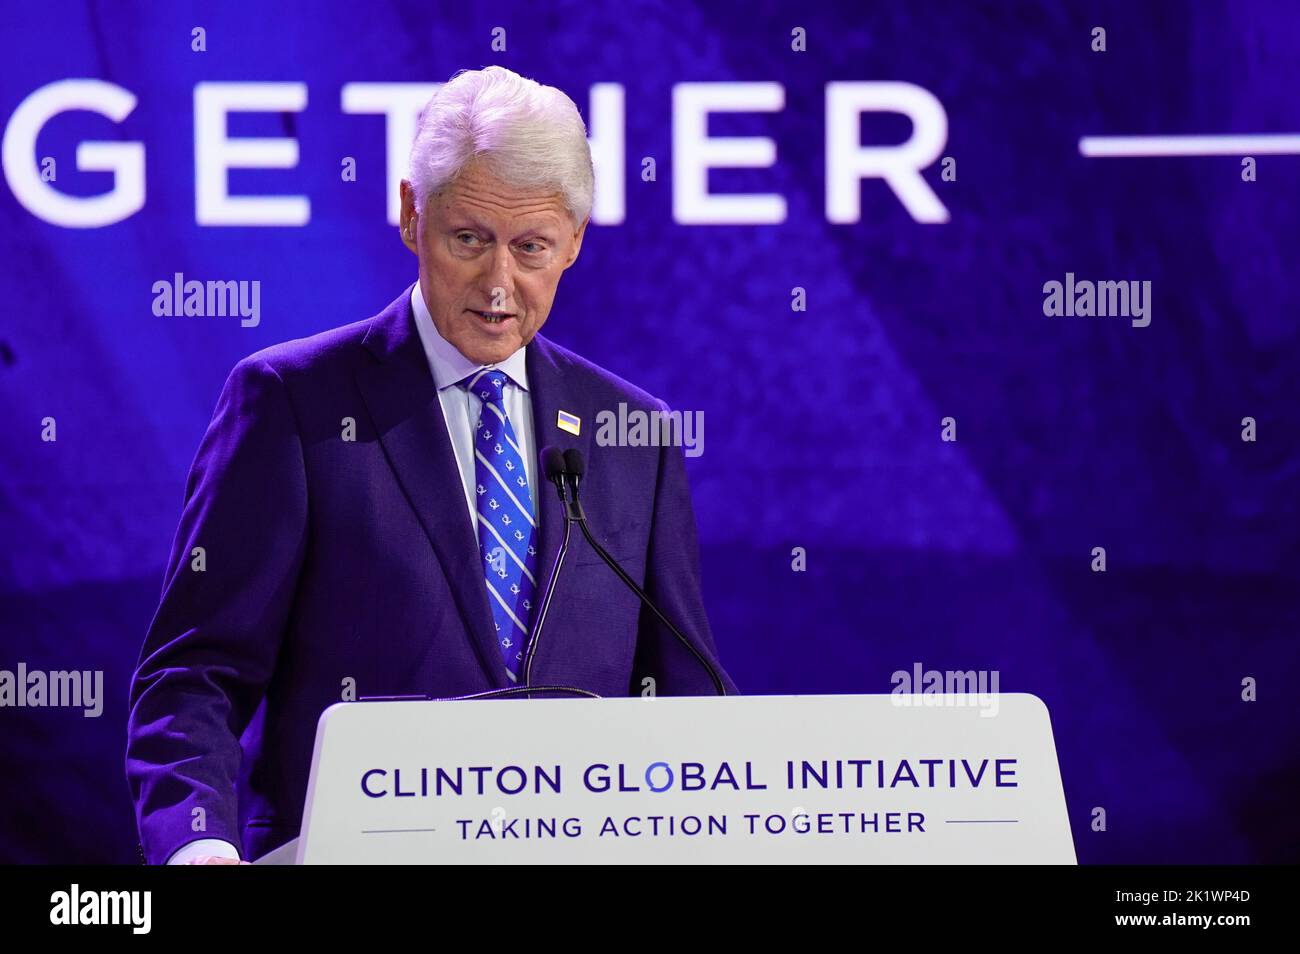 09/20/2022 New York City, New York President William Jefferson Clinton, Bill Clinton, President Clinton during the 2022 Clinton Global Initiative held at Hilton Midtown Tuesday September 20, 2022 in New York City. Photo by Jennifer Graylock-Alamy News 917-519-7666 Stock Photo